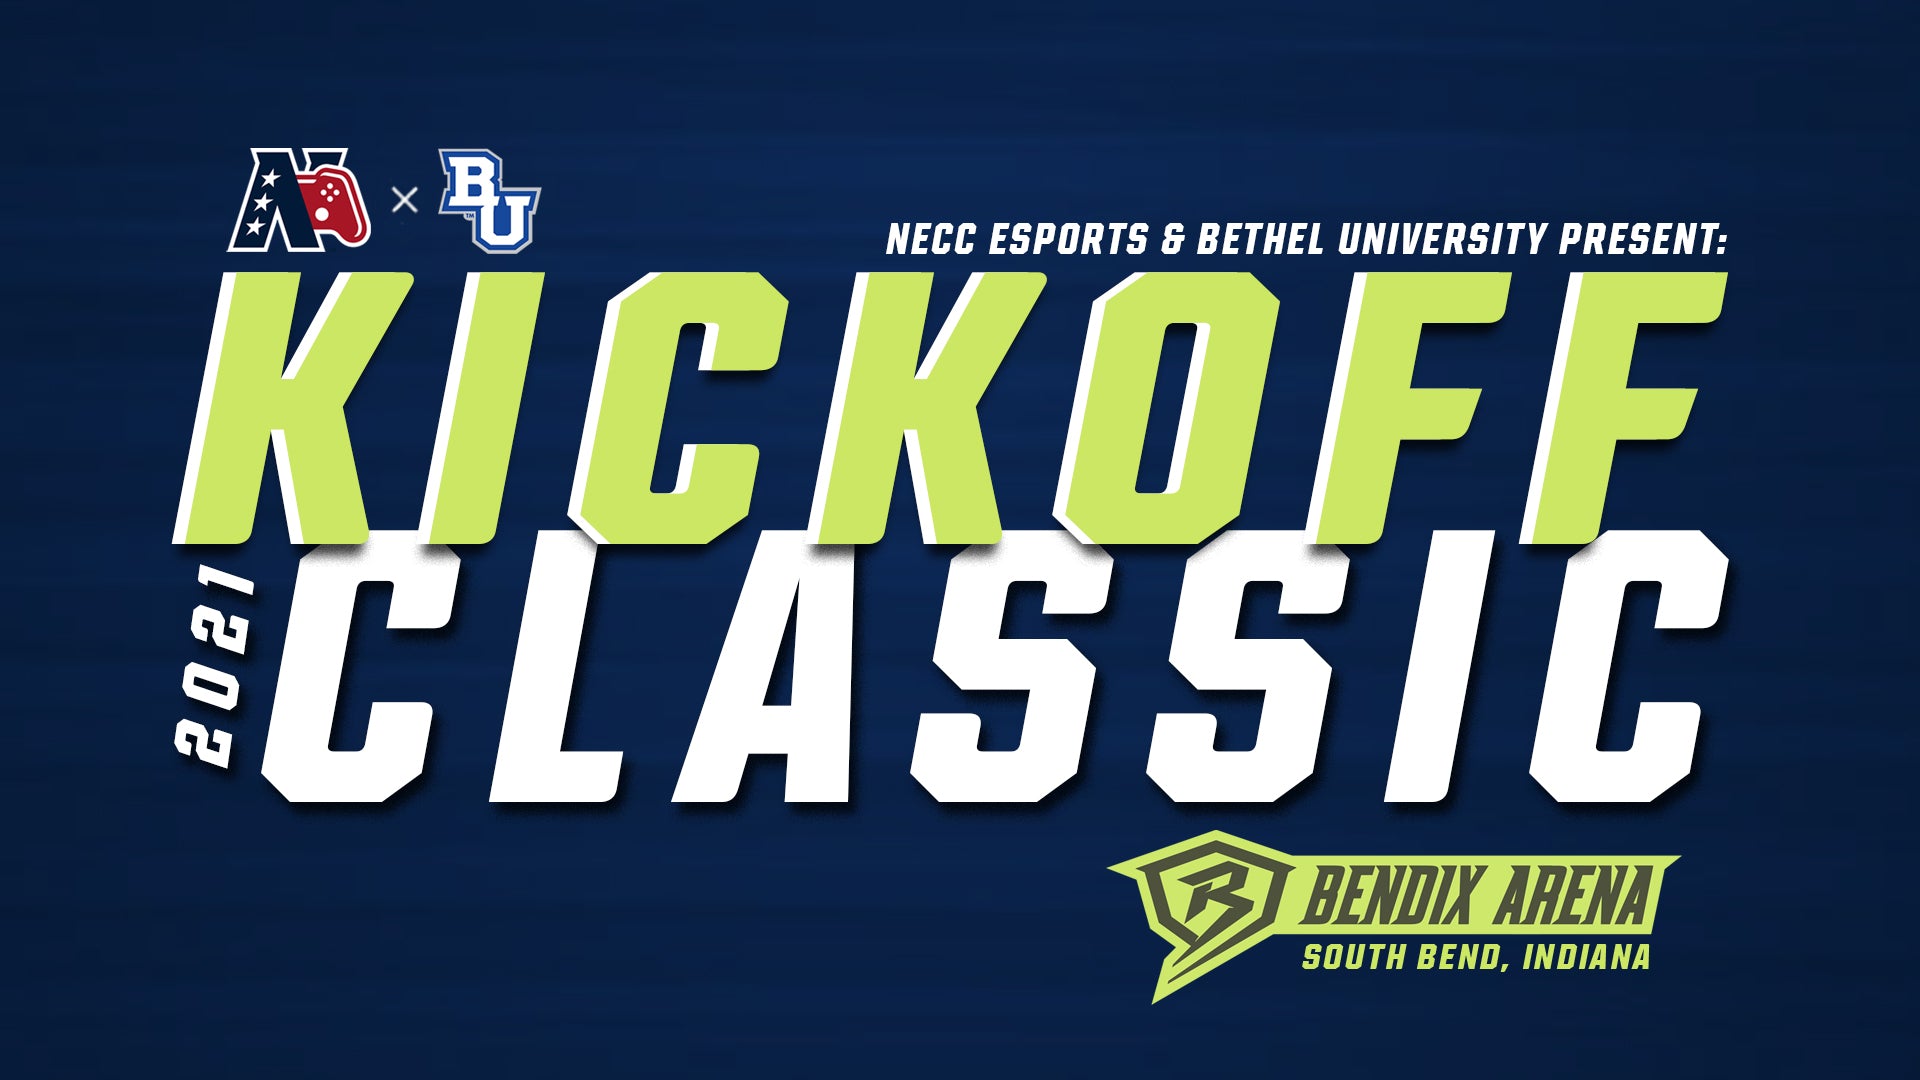 NECC Announces Plans for First-Ever Scholastic LAN Event - The NECC Kickoff Classic